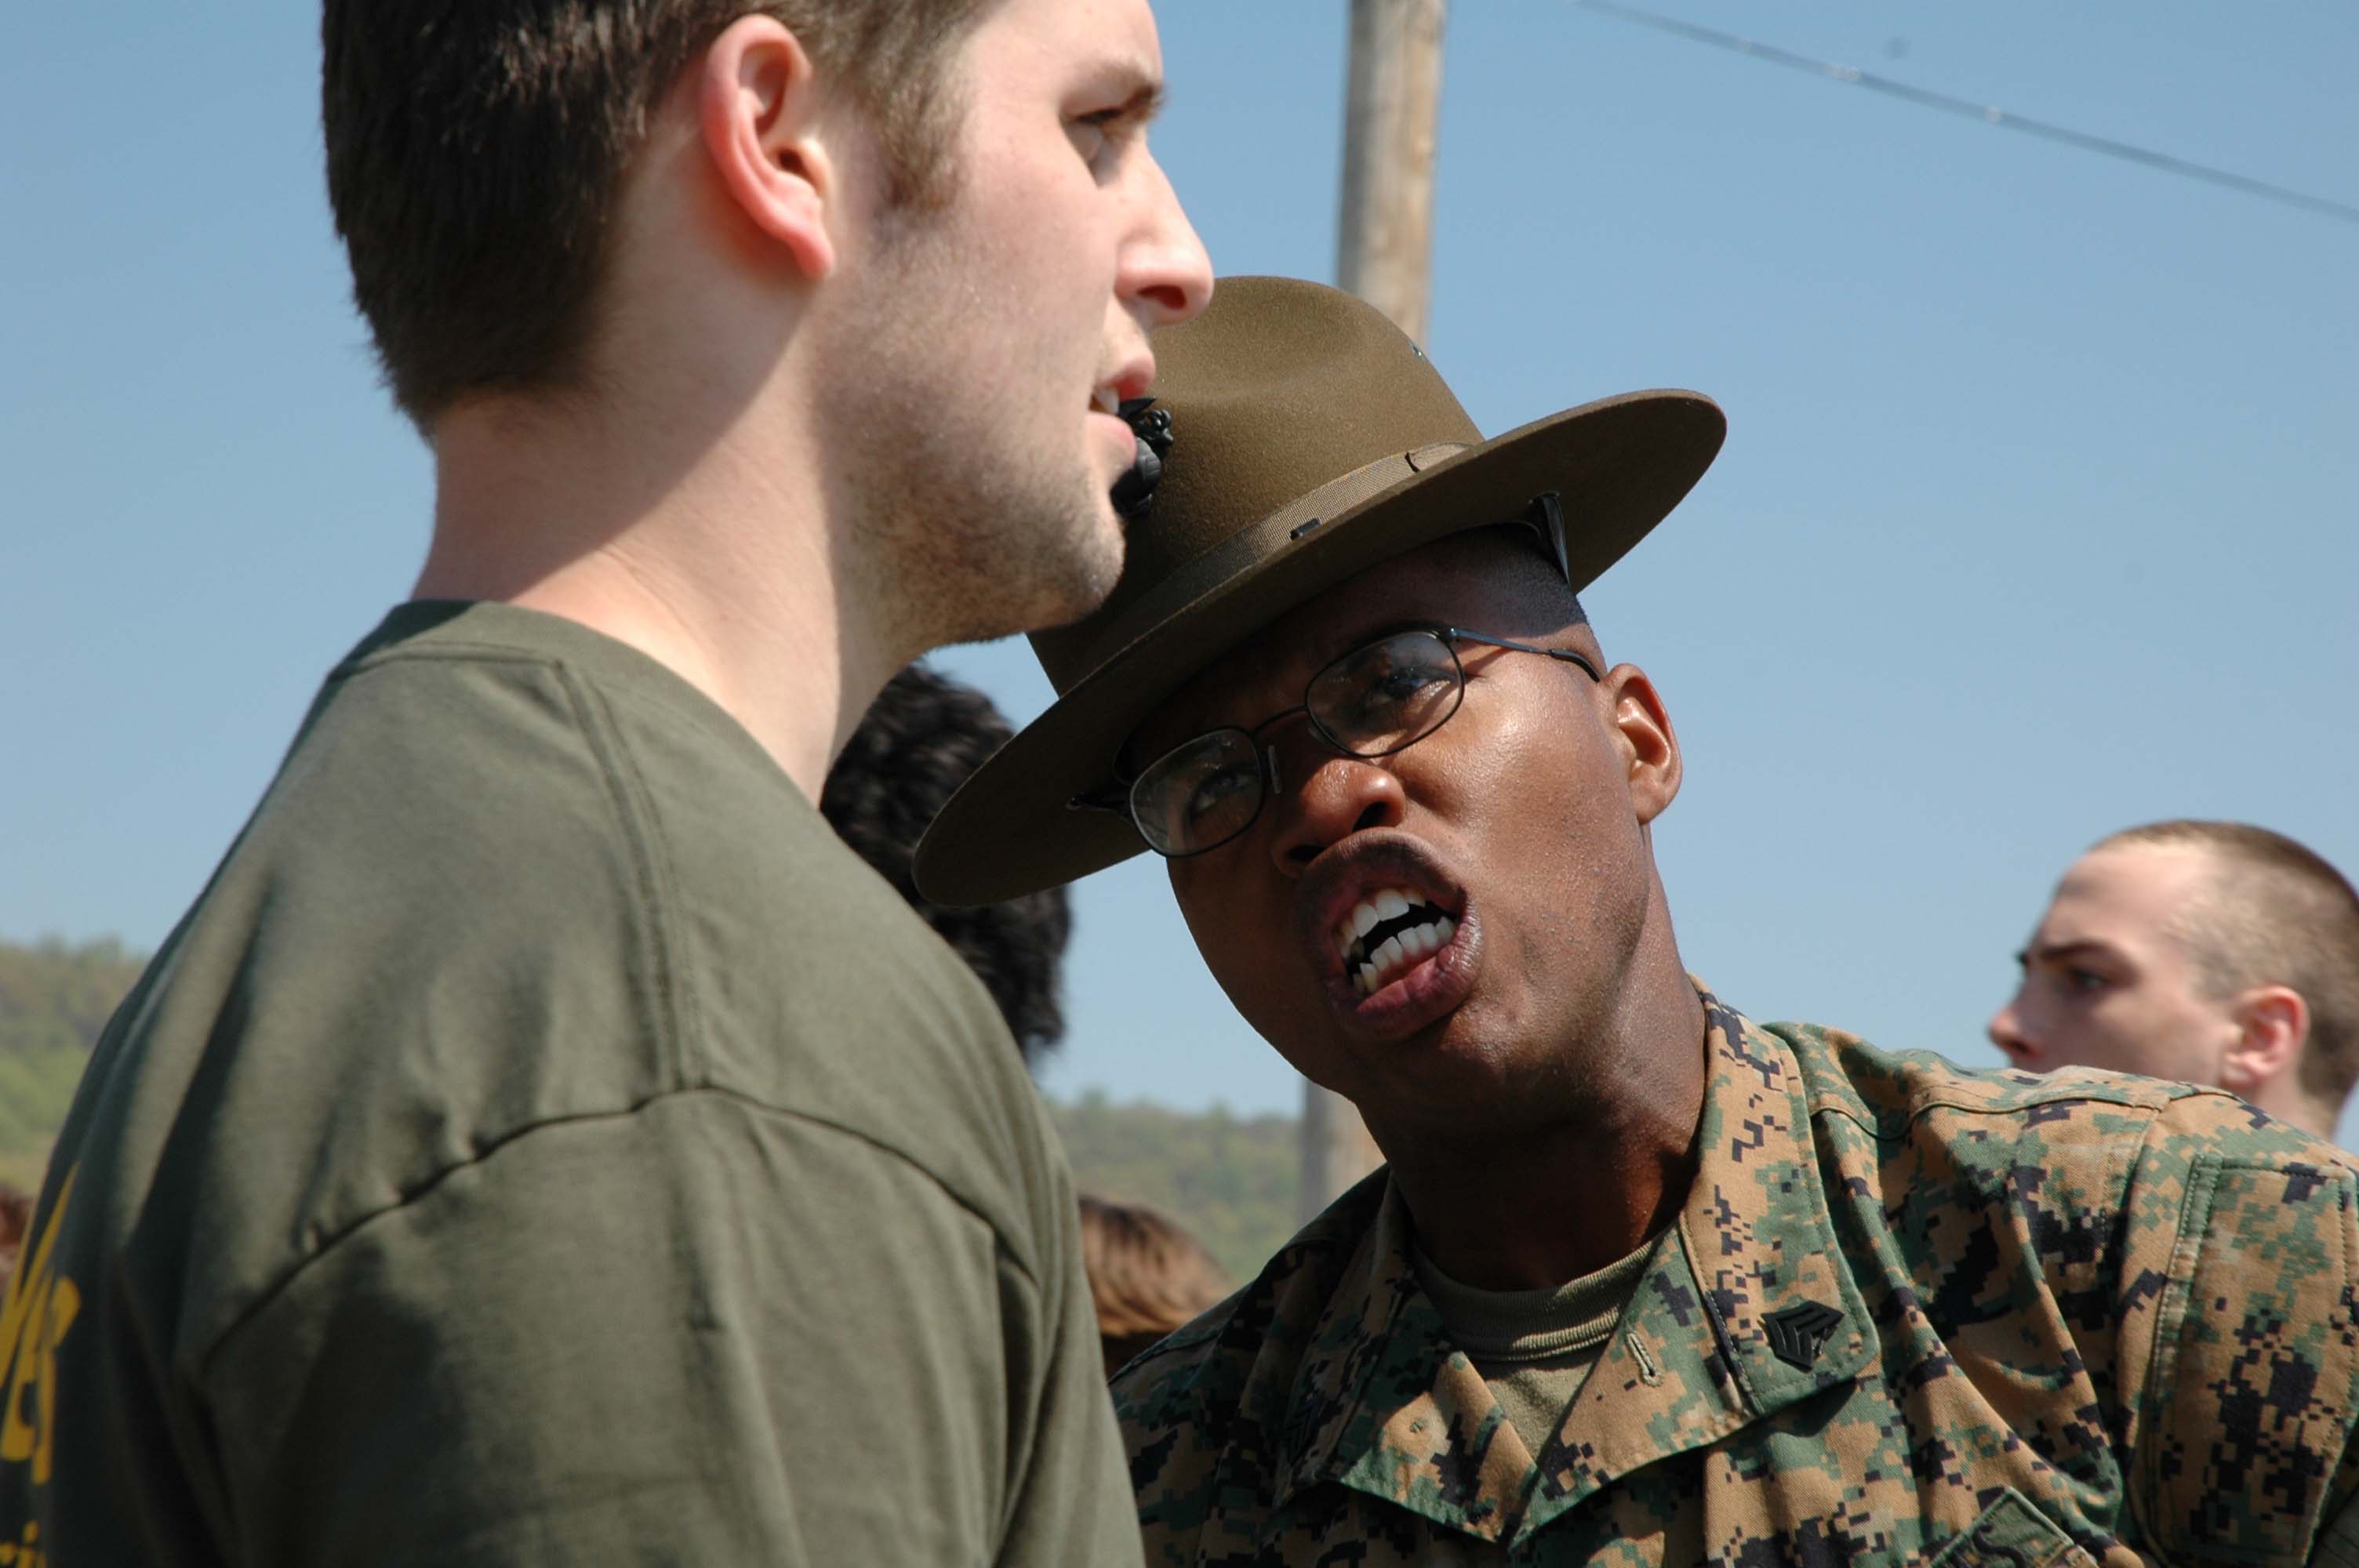 instructors camp drill boot Marine corps